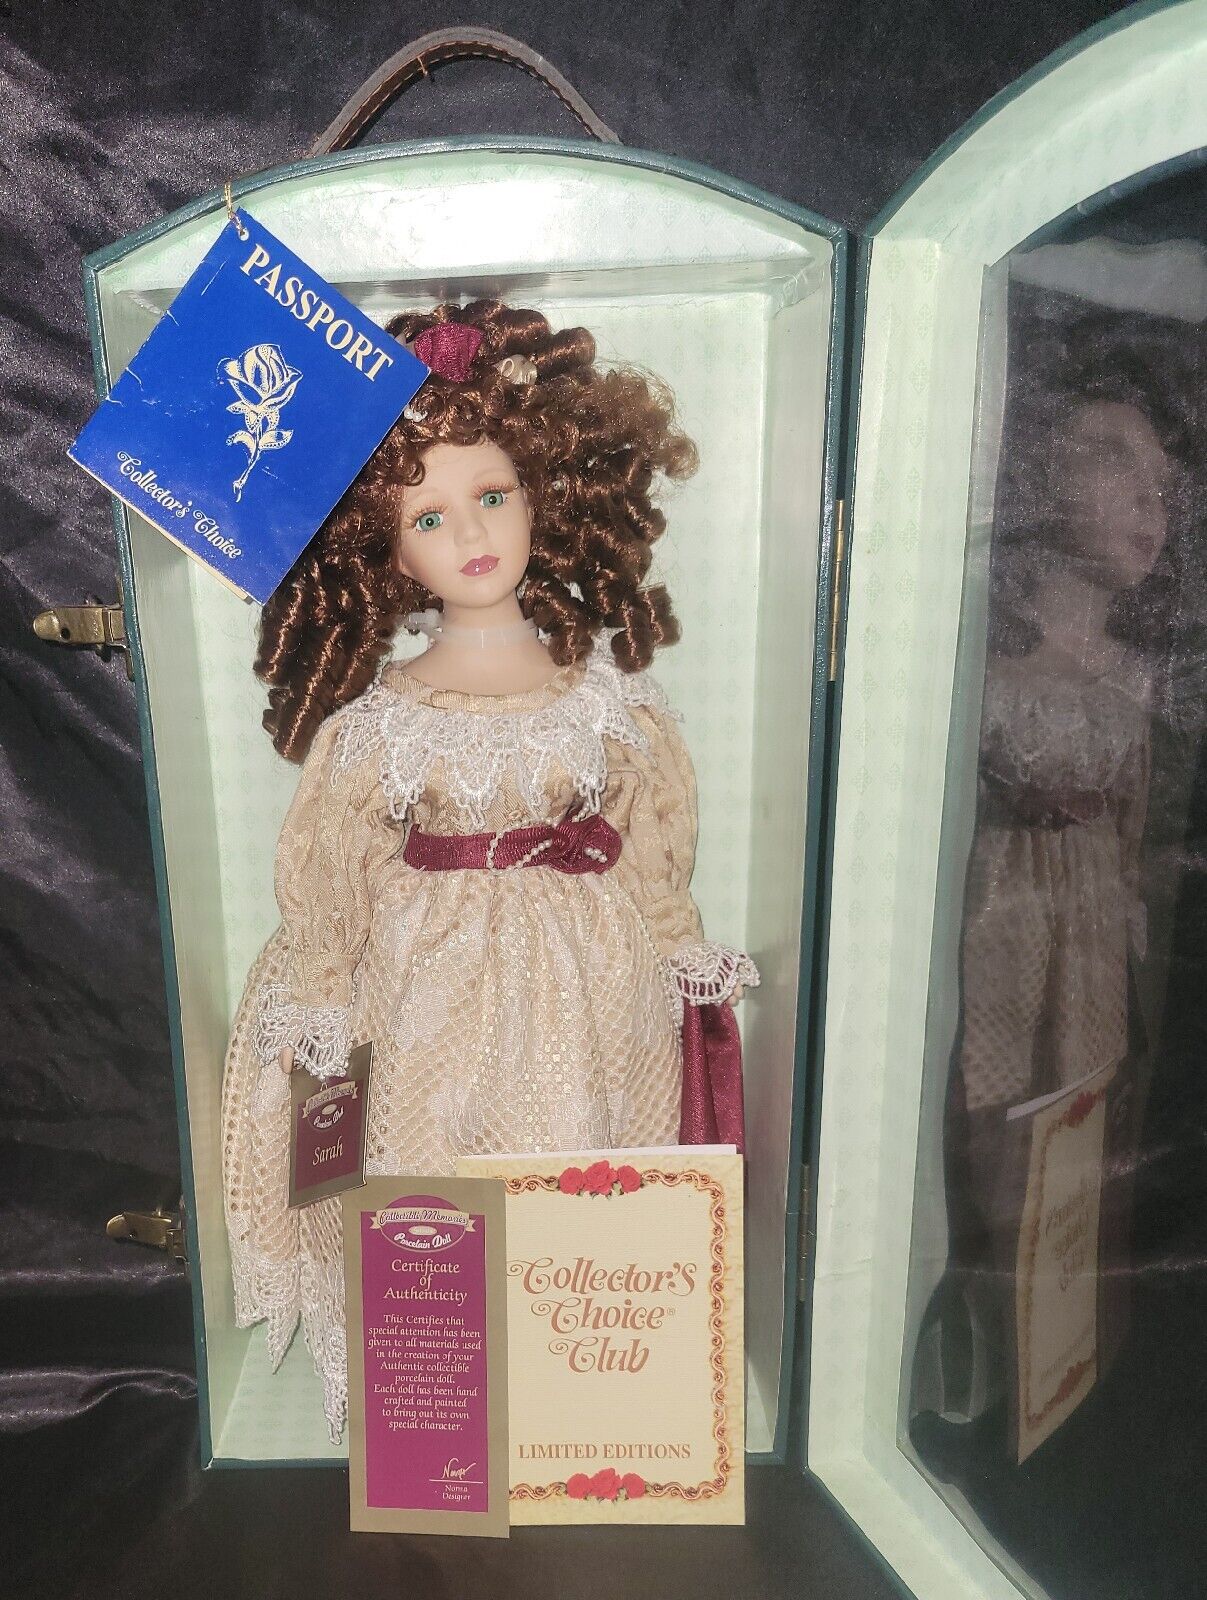 Passport collectors choice porcelain doll handcrafted limited edition 16 in tall